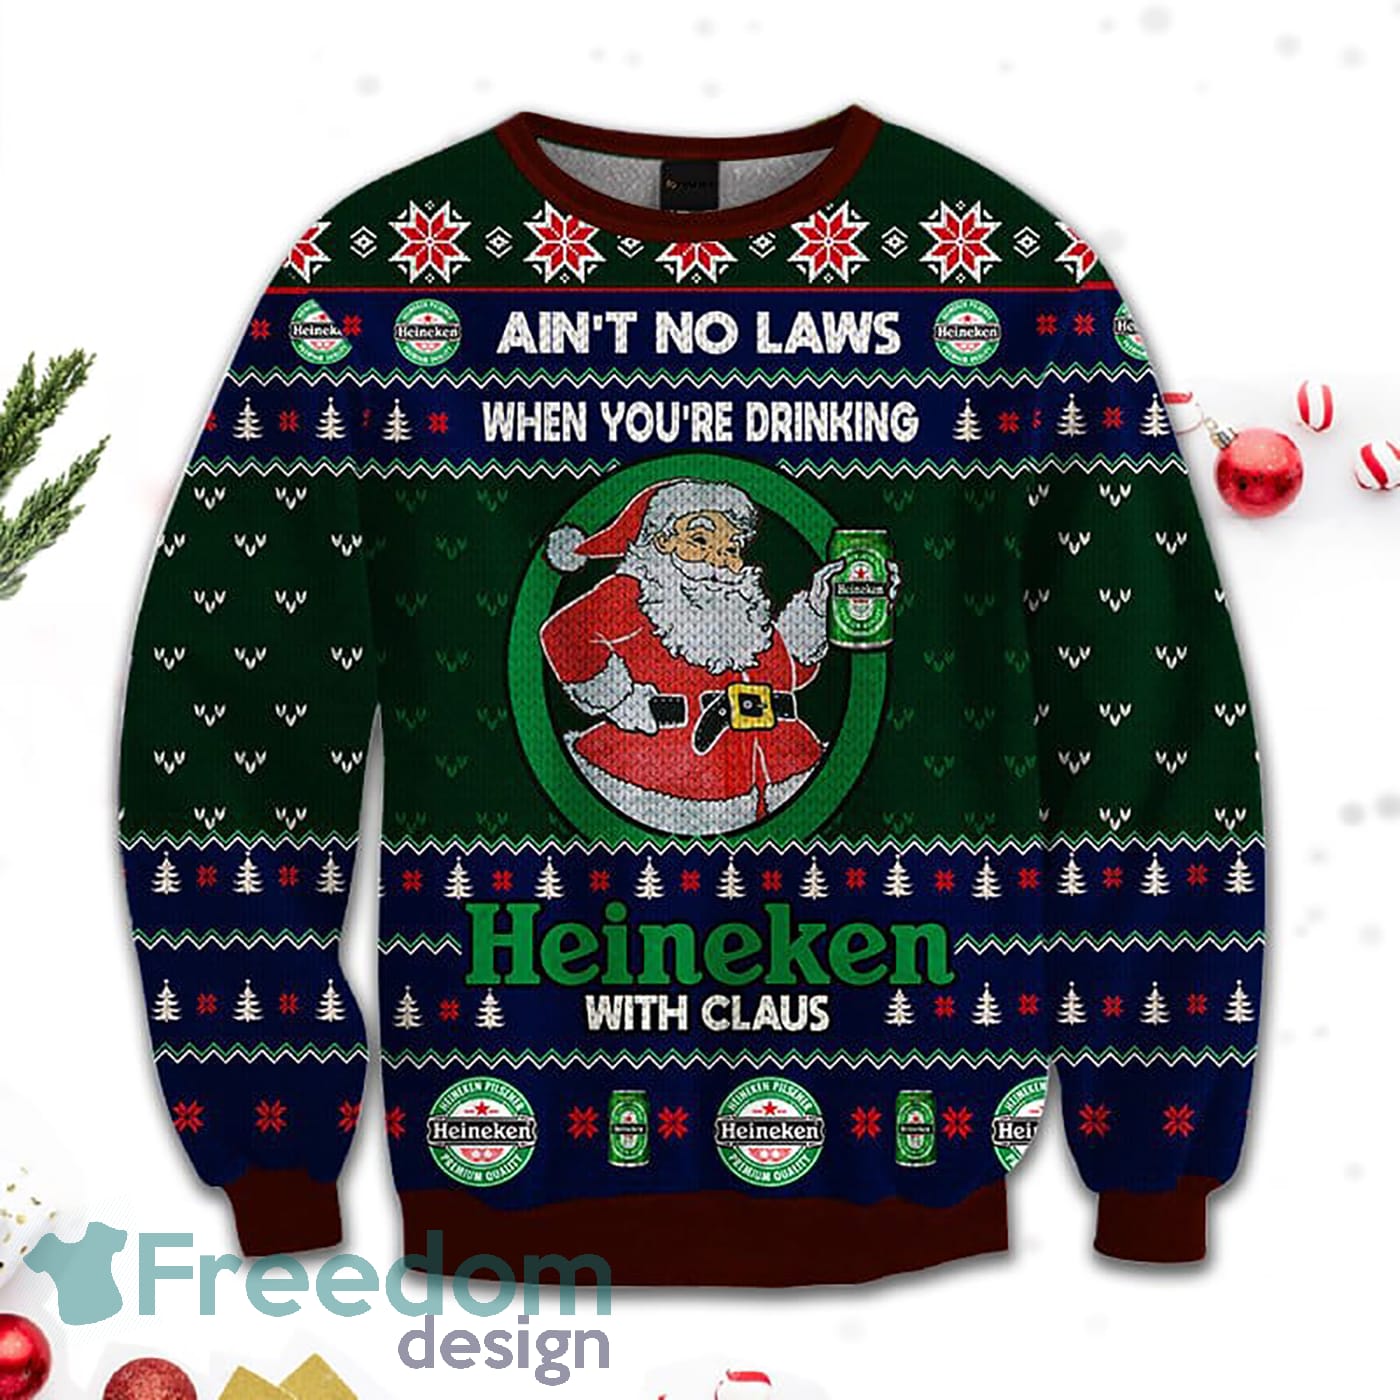 Merr Christmas Ain't No Laws When You Drink J?germeister With Claus Sweatshirt